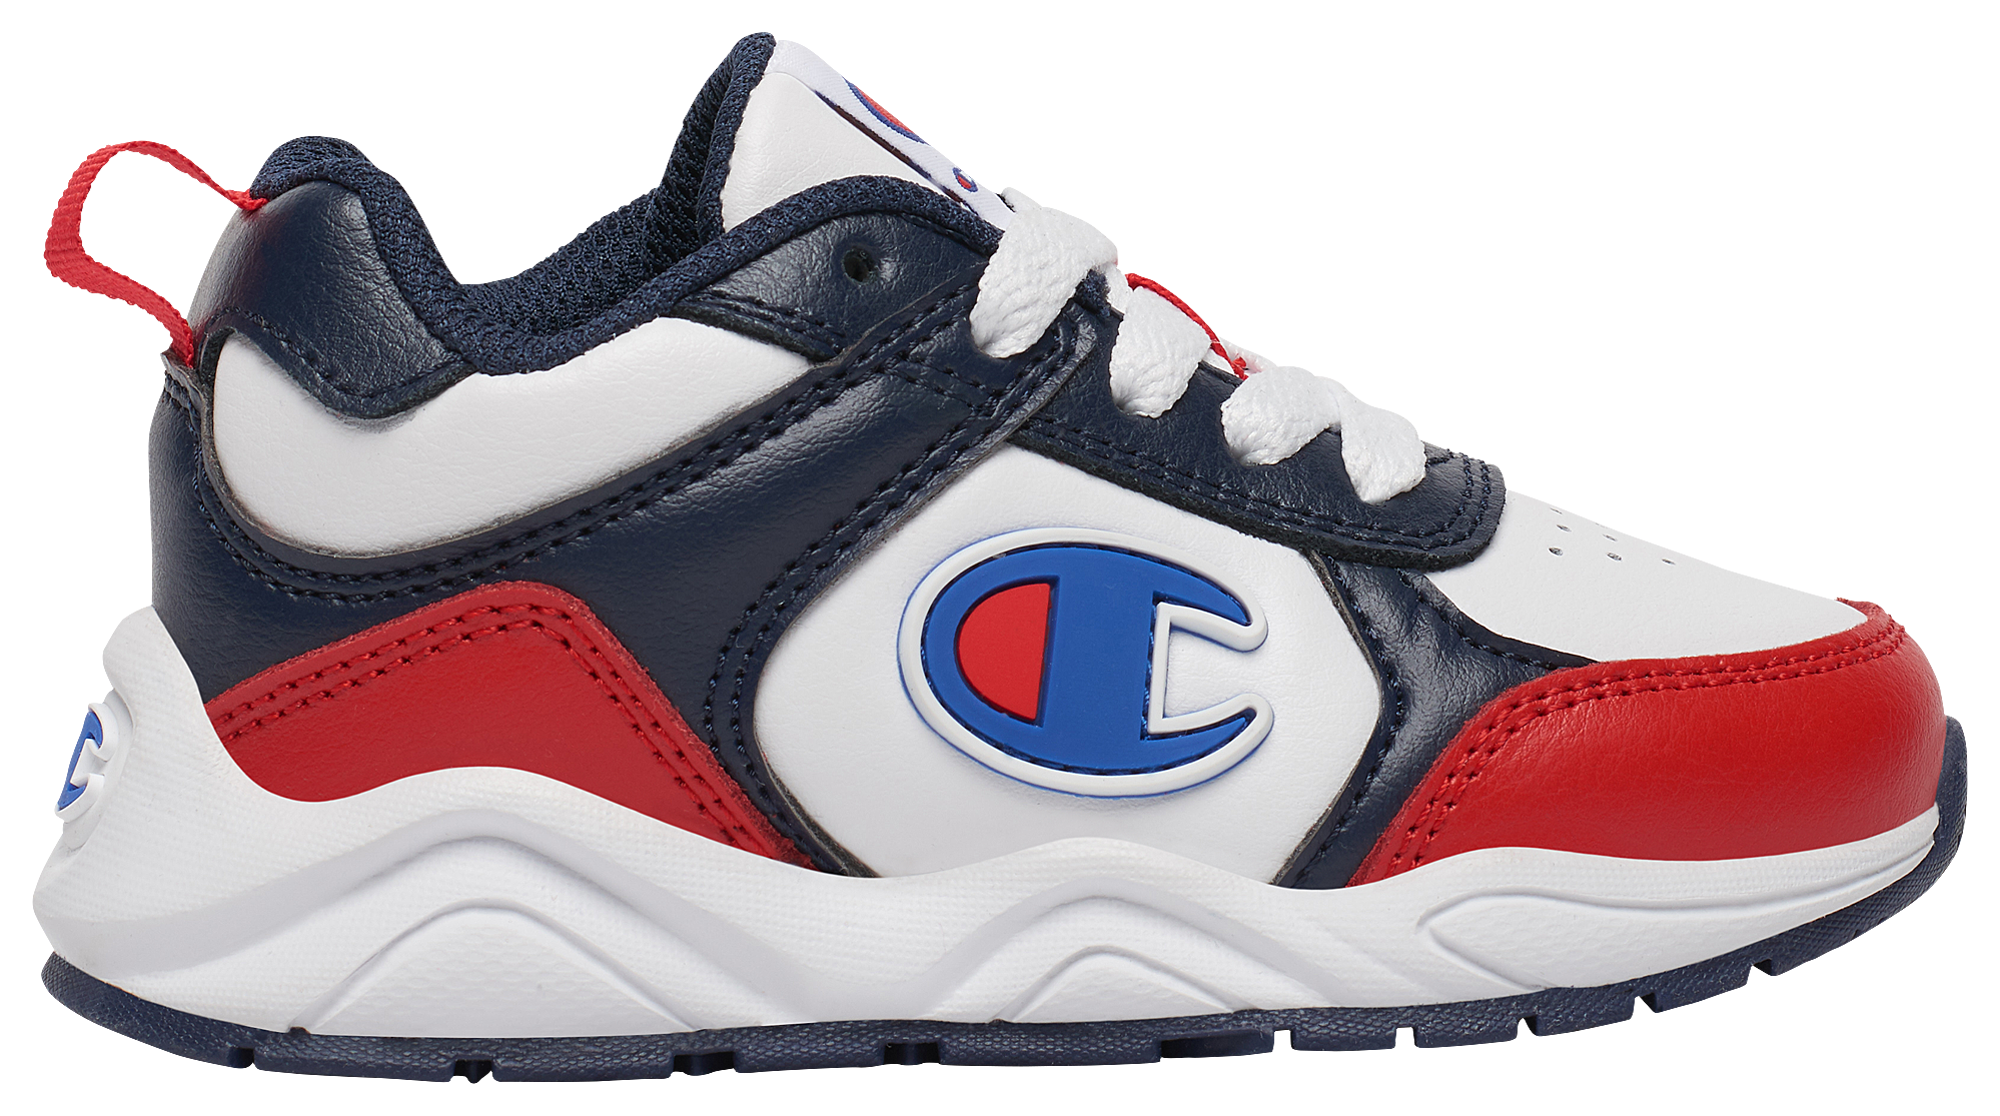 champion shoes for babies